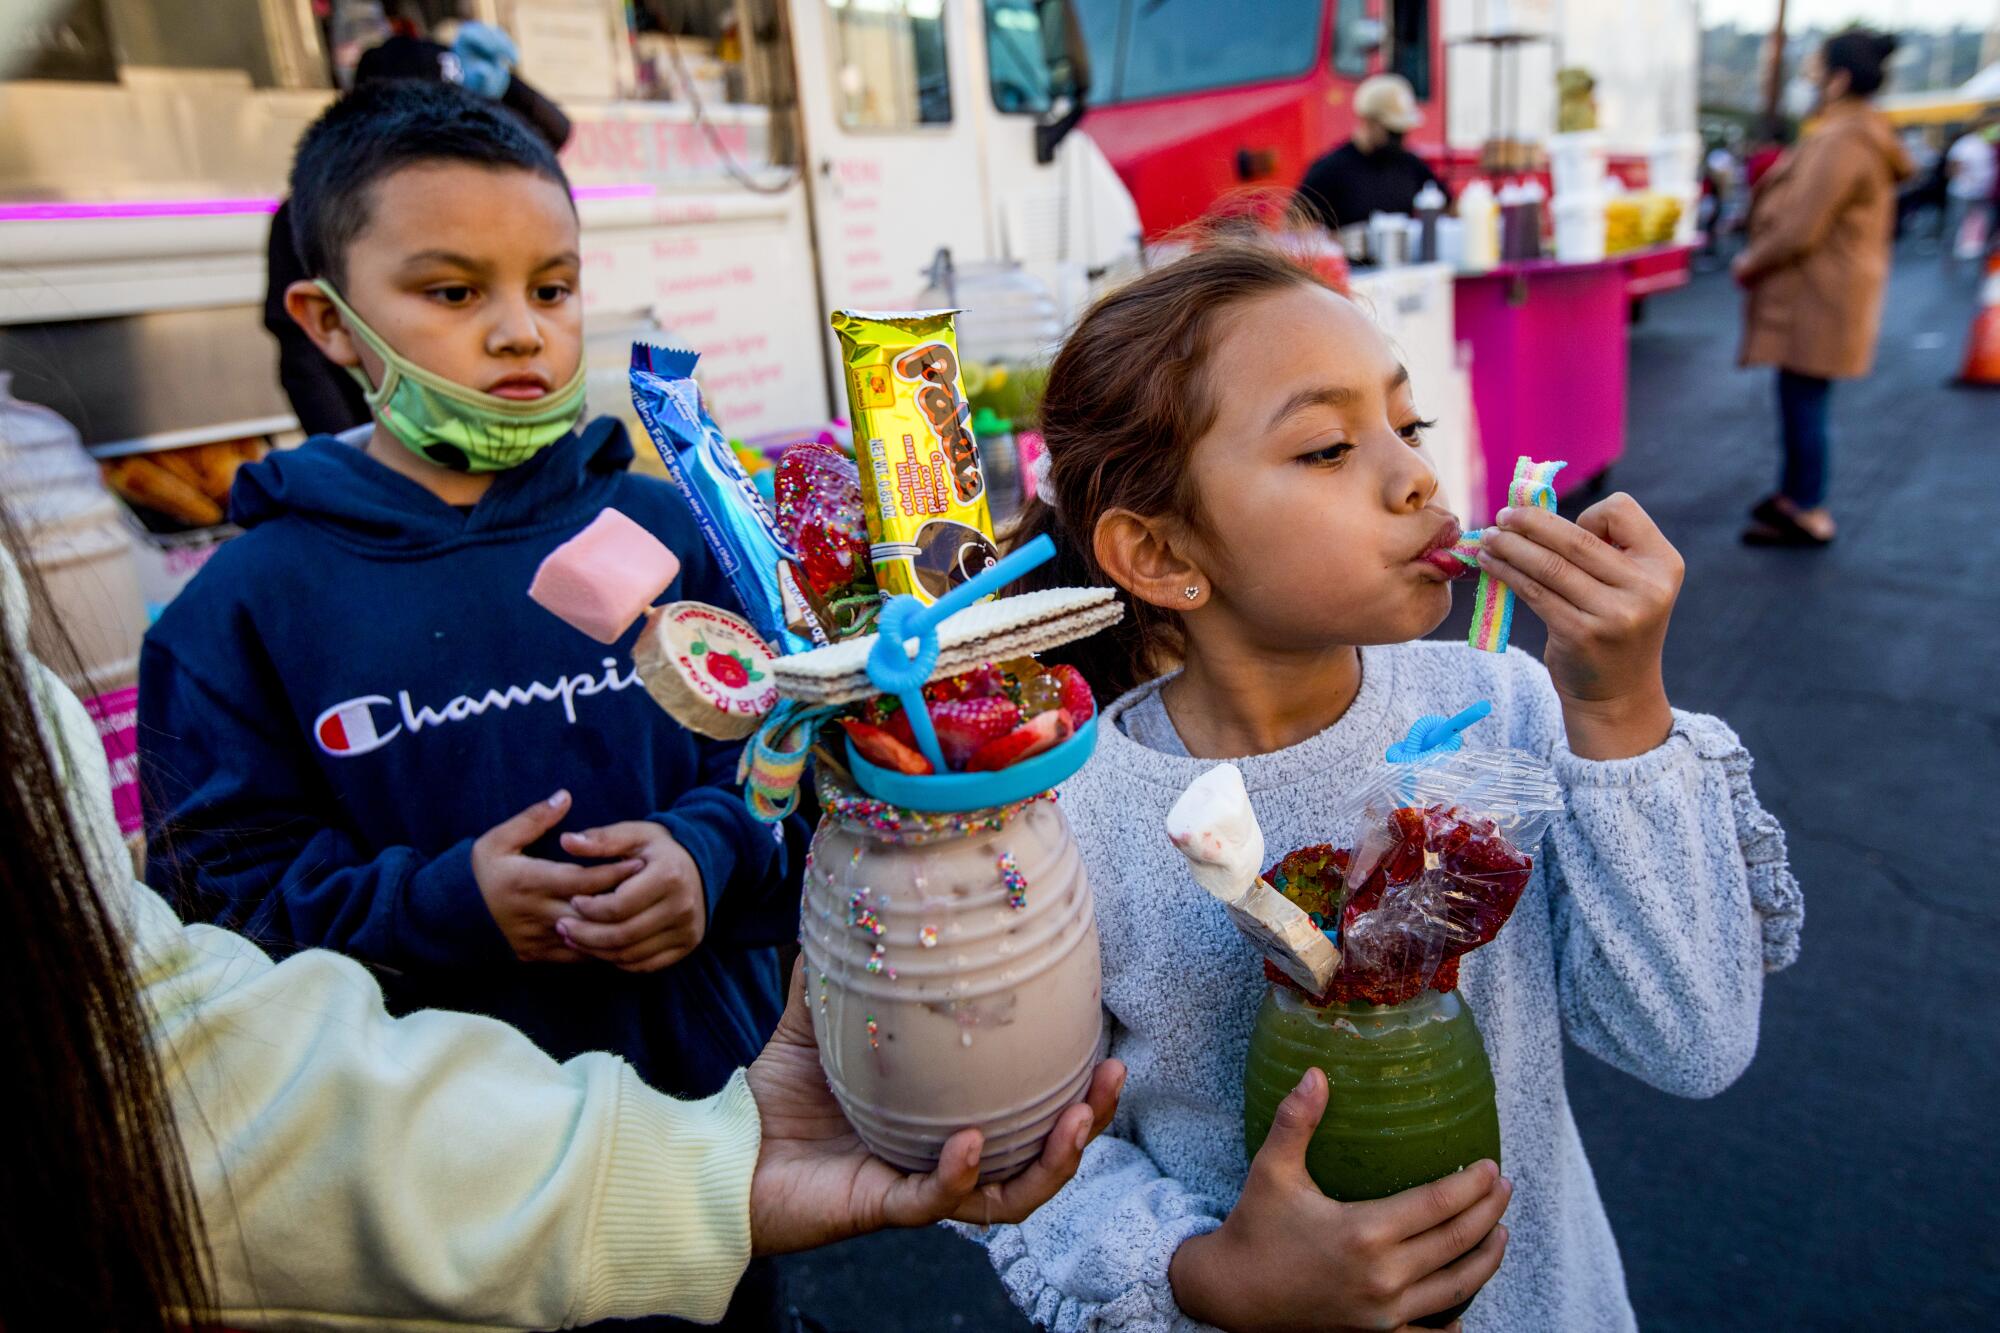 Kids enjoy treats from the Sugar Box L.A. food truck at the Avenue 26 night market in Lincoln Heights.